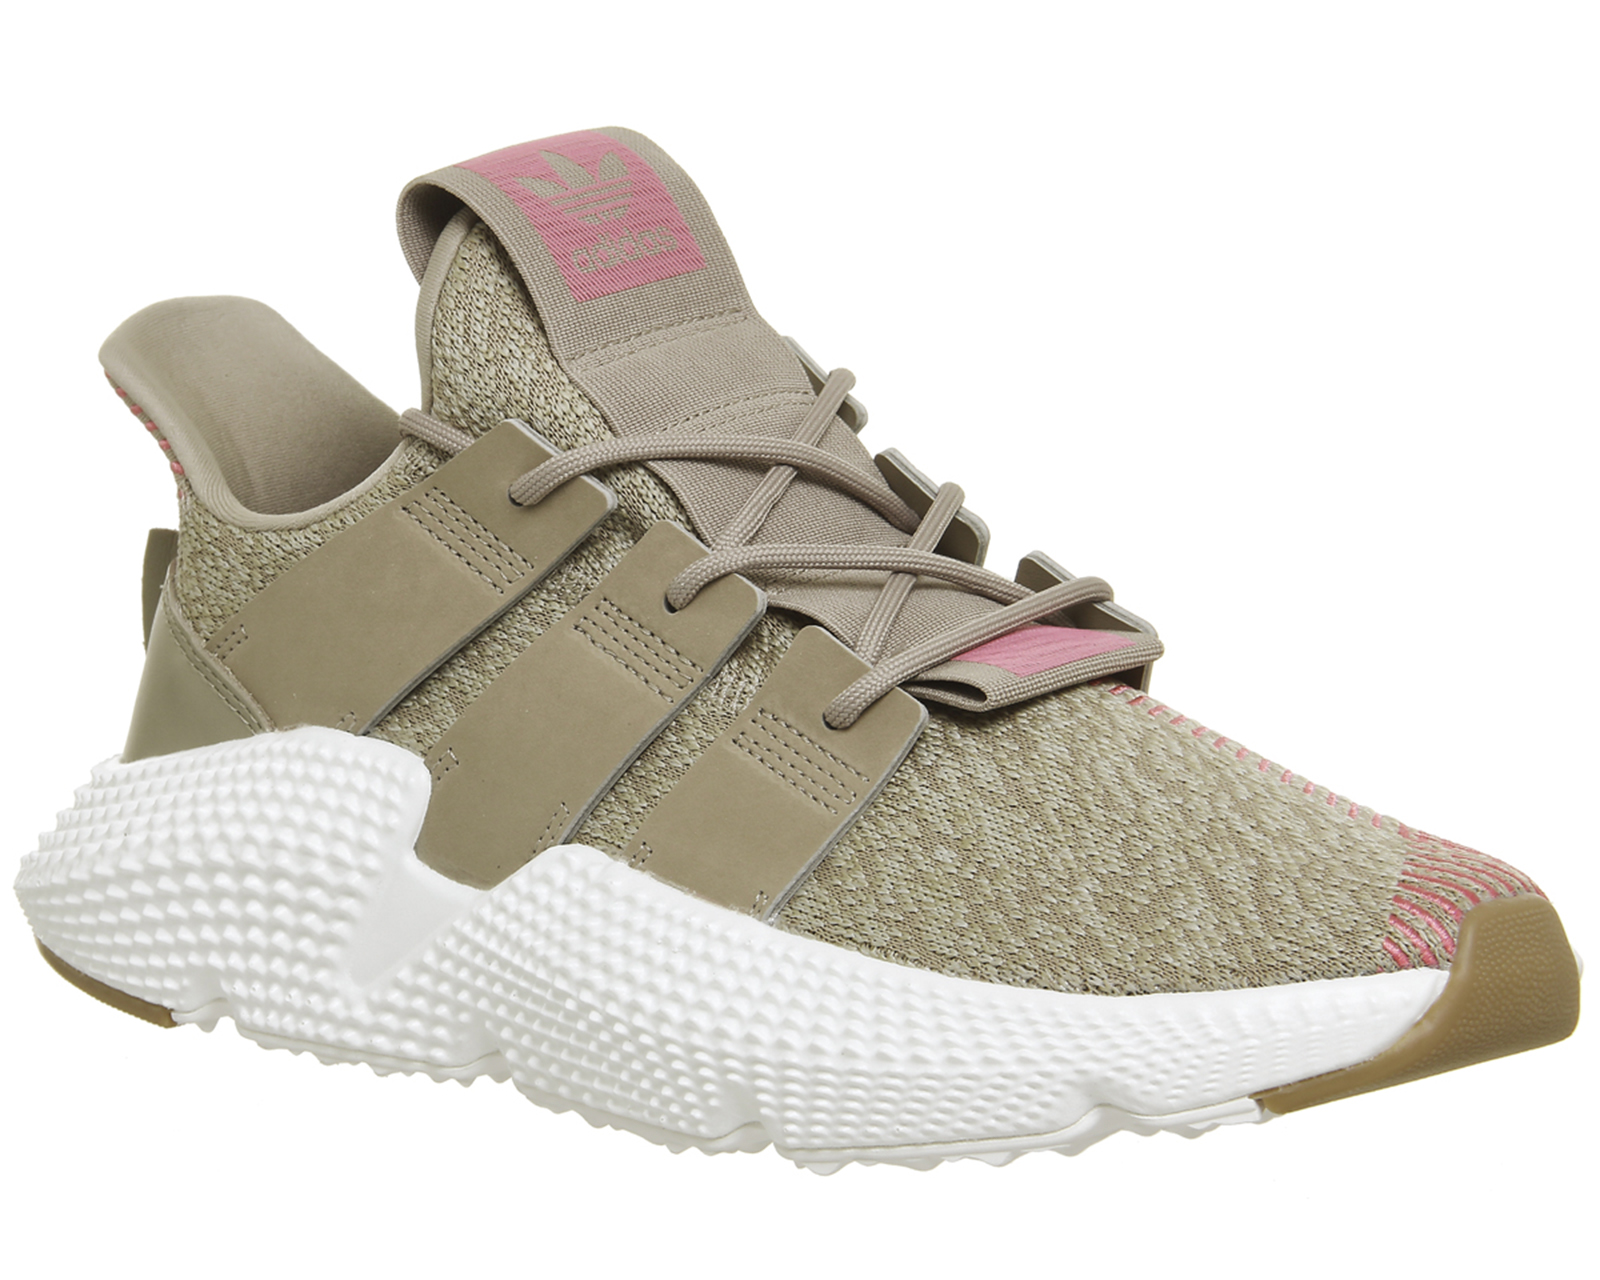 adidas prophere adidas trainers